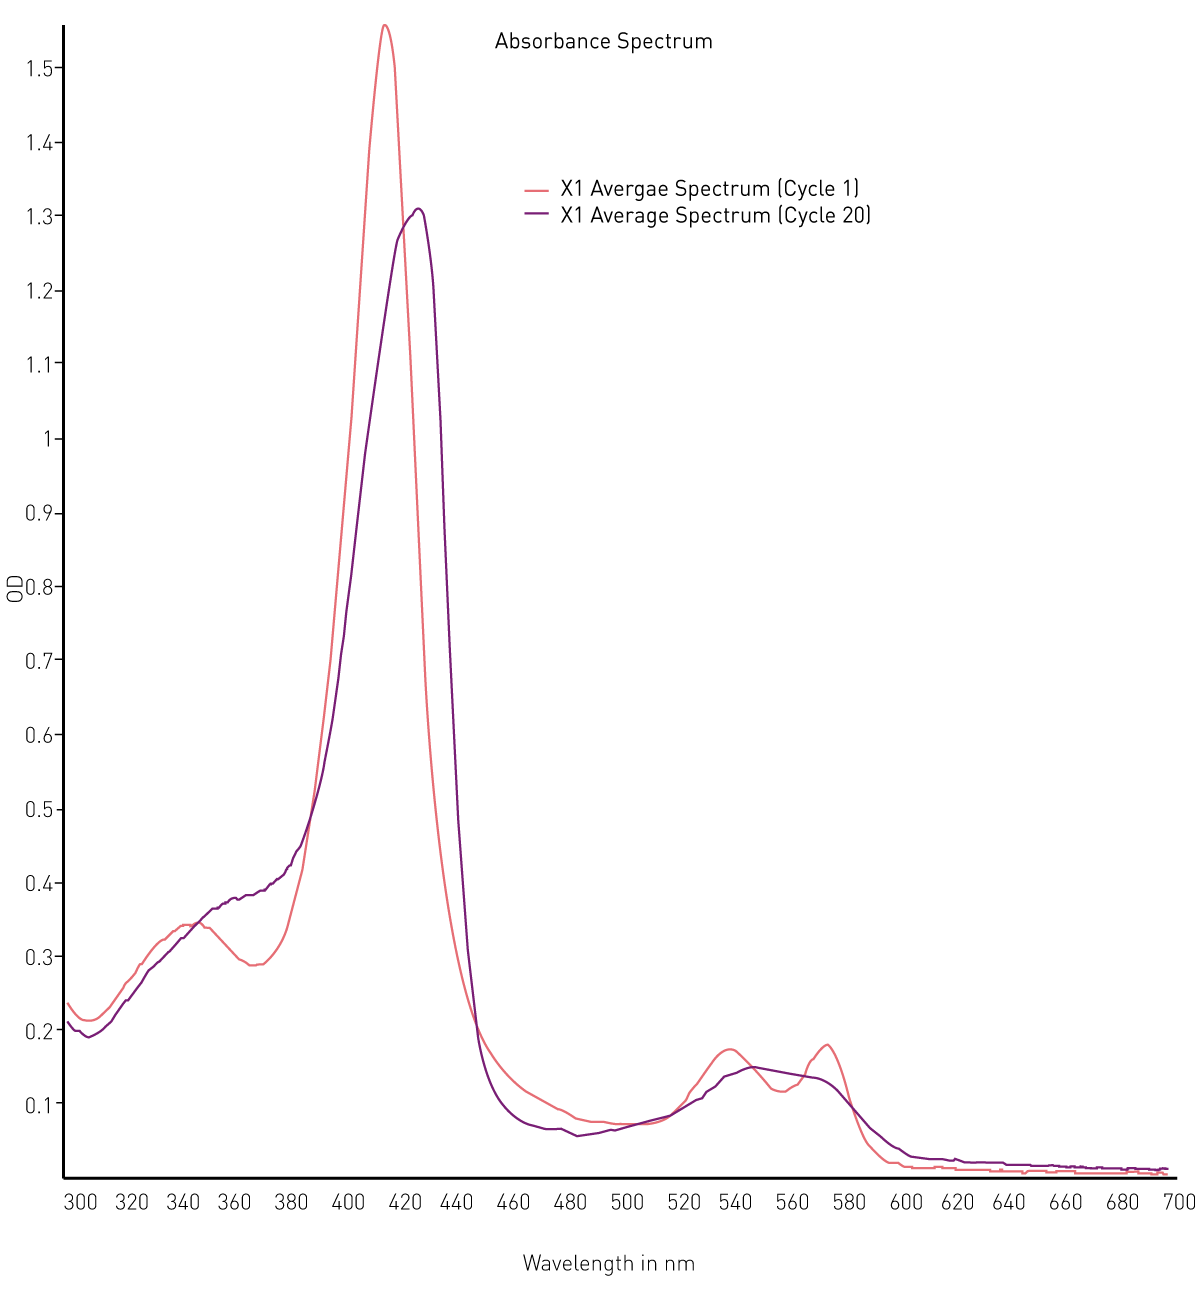 Fig. 2: Spectra of Hemoglobin over 2 hours of deoxygenation. Overlay of spectra collected for Hb at t = 0 (red) and t = 120 minutes (purple)